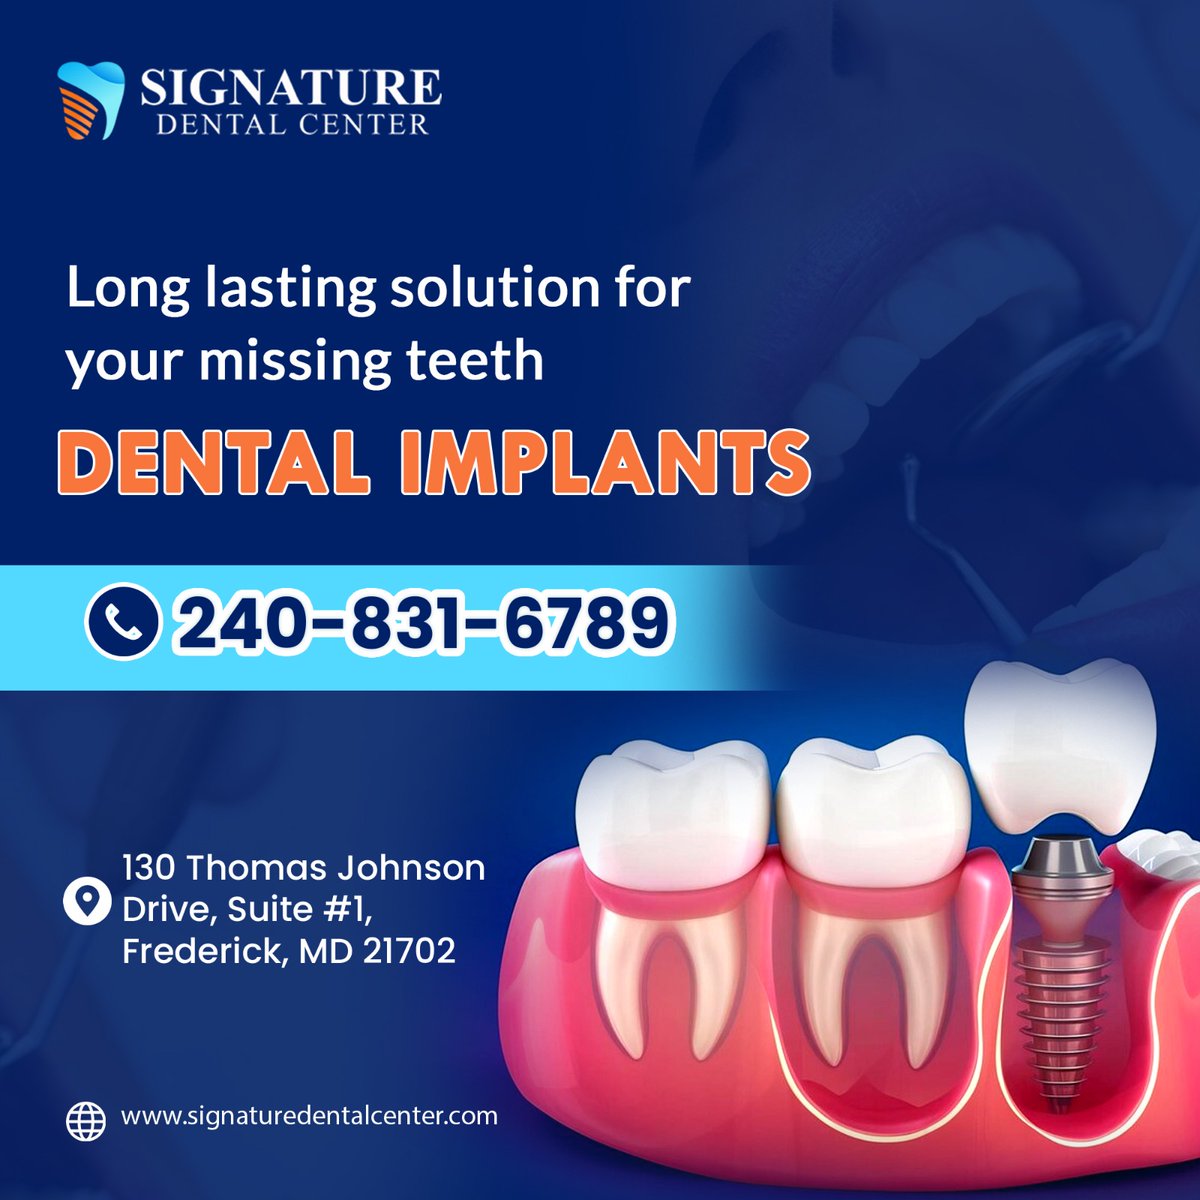 Regain confidence in your smile with dental implants! Say goodbye to gaps and hello to a natural-looking, long-lasting solution.
.
For appointments, call or text: +1240-831-6789
Or Visit: signaturedentalcenter.com
.
#Dentalimplants #Dentaltreatment #toothextraction
#teethwhitening